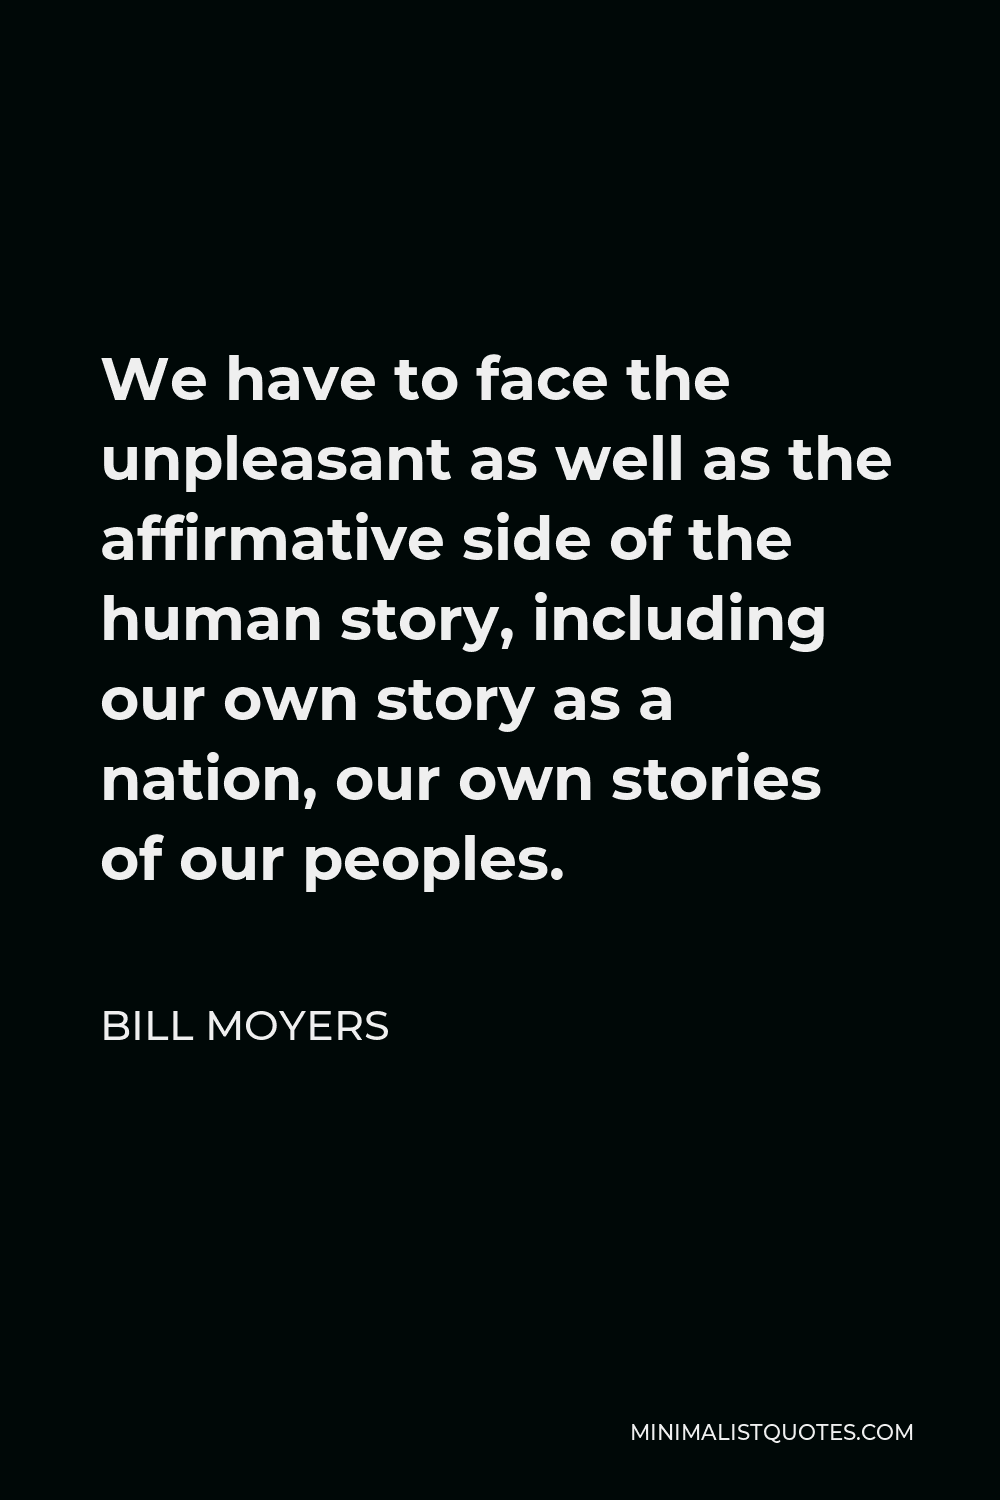 Bill Moyers Quote - We have to face the unpleasant as well as the affirmative side of the human story, including our own story as a nation, our own stories of our peoples.